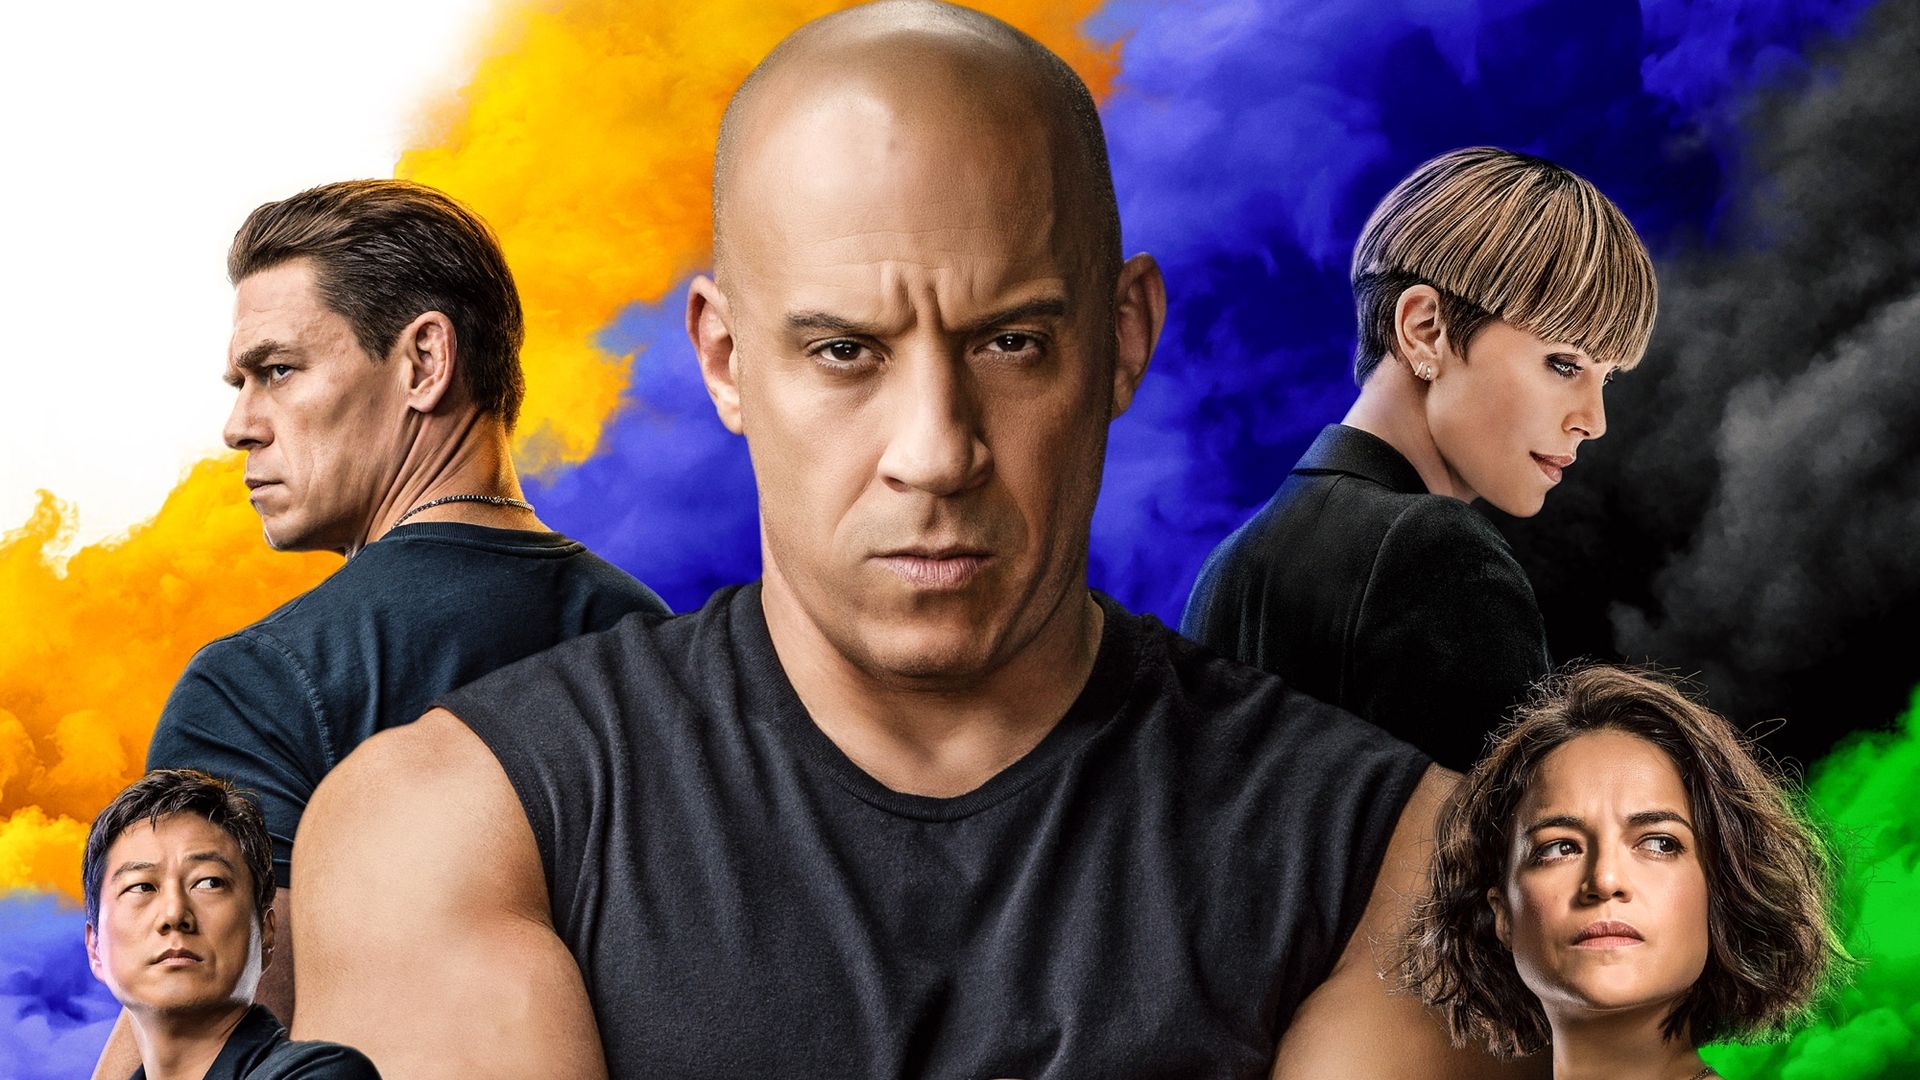 How to watch Fast and Furious movies in order online Tom's Guide